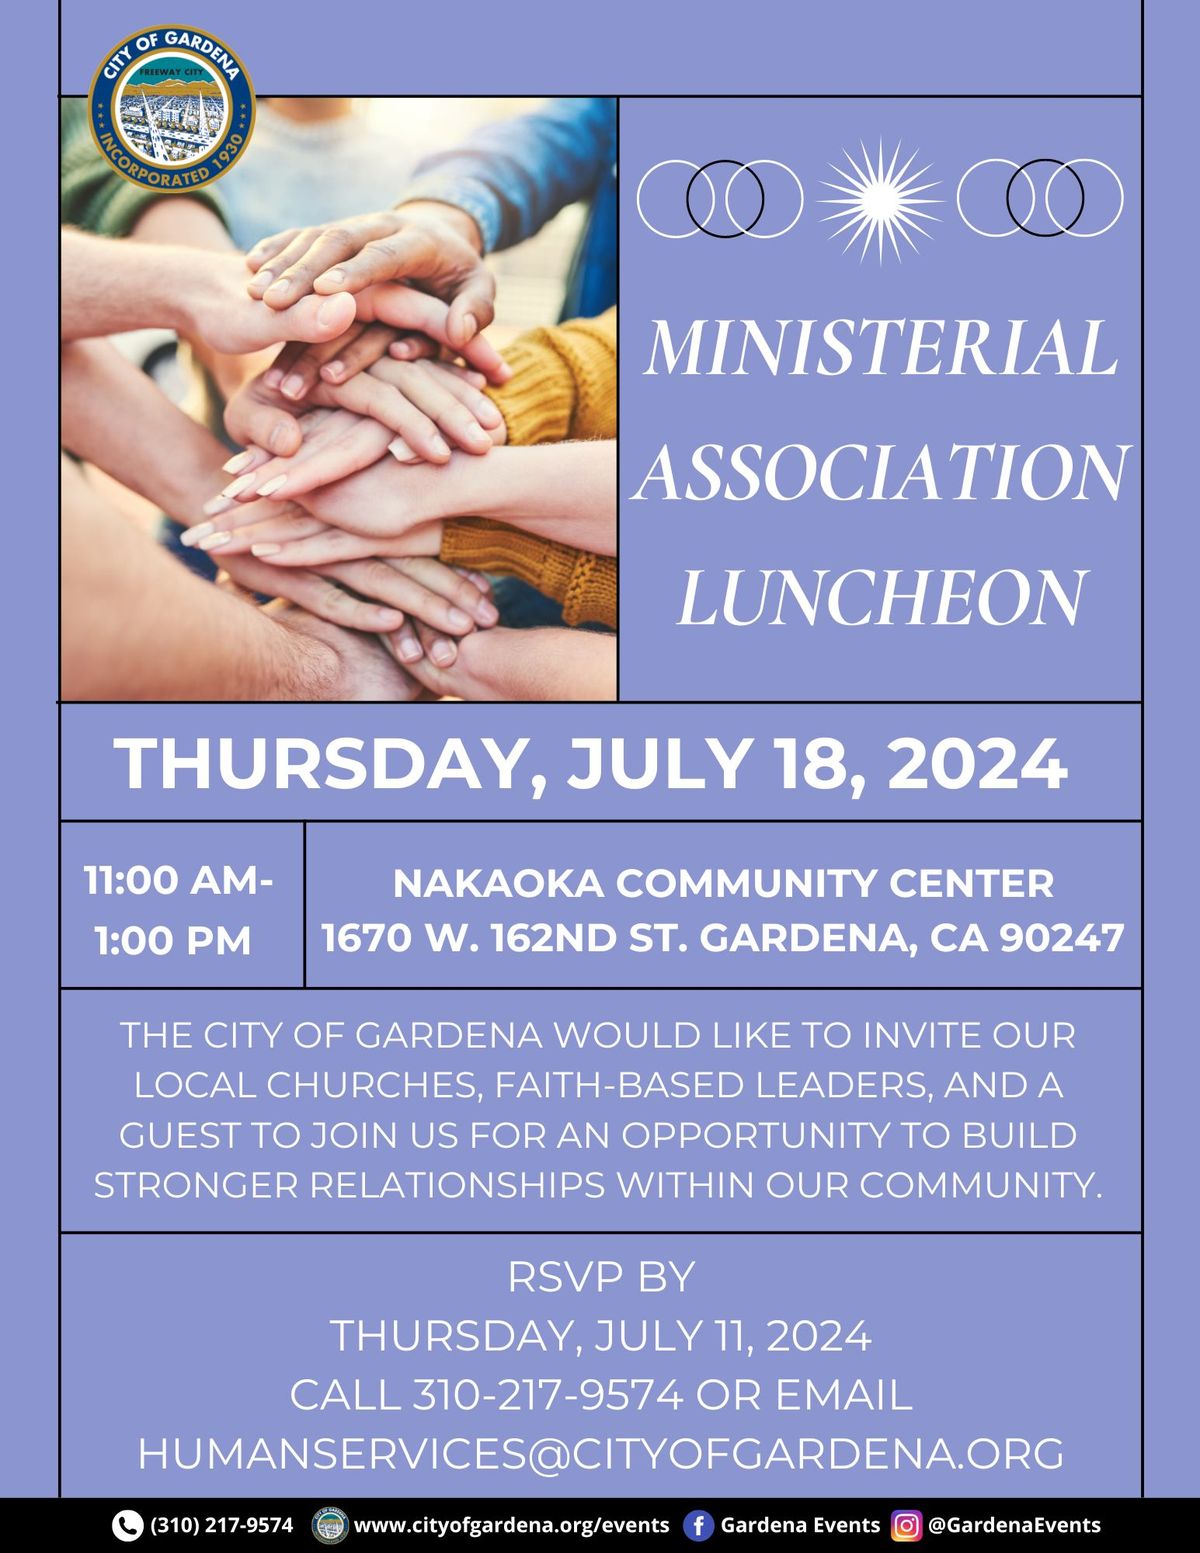 Ministerial Association Luncheon